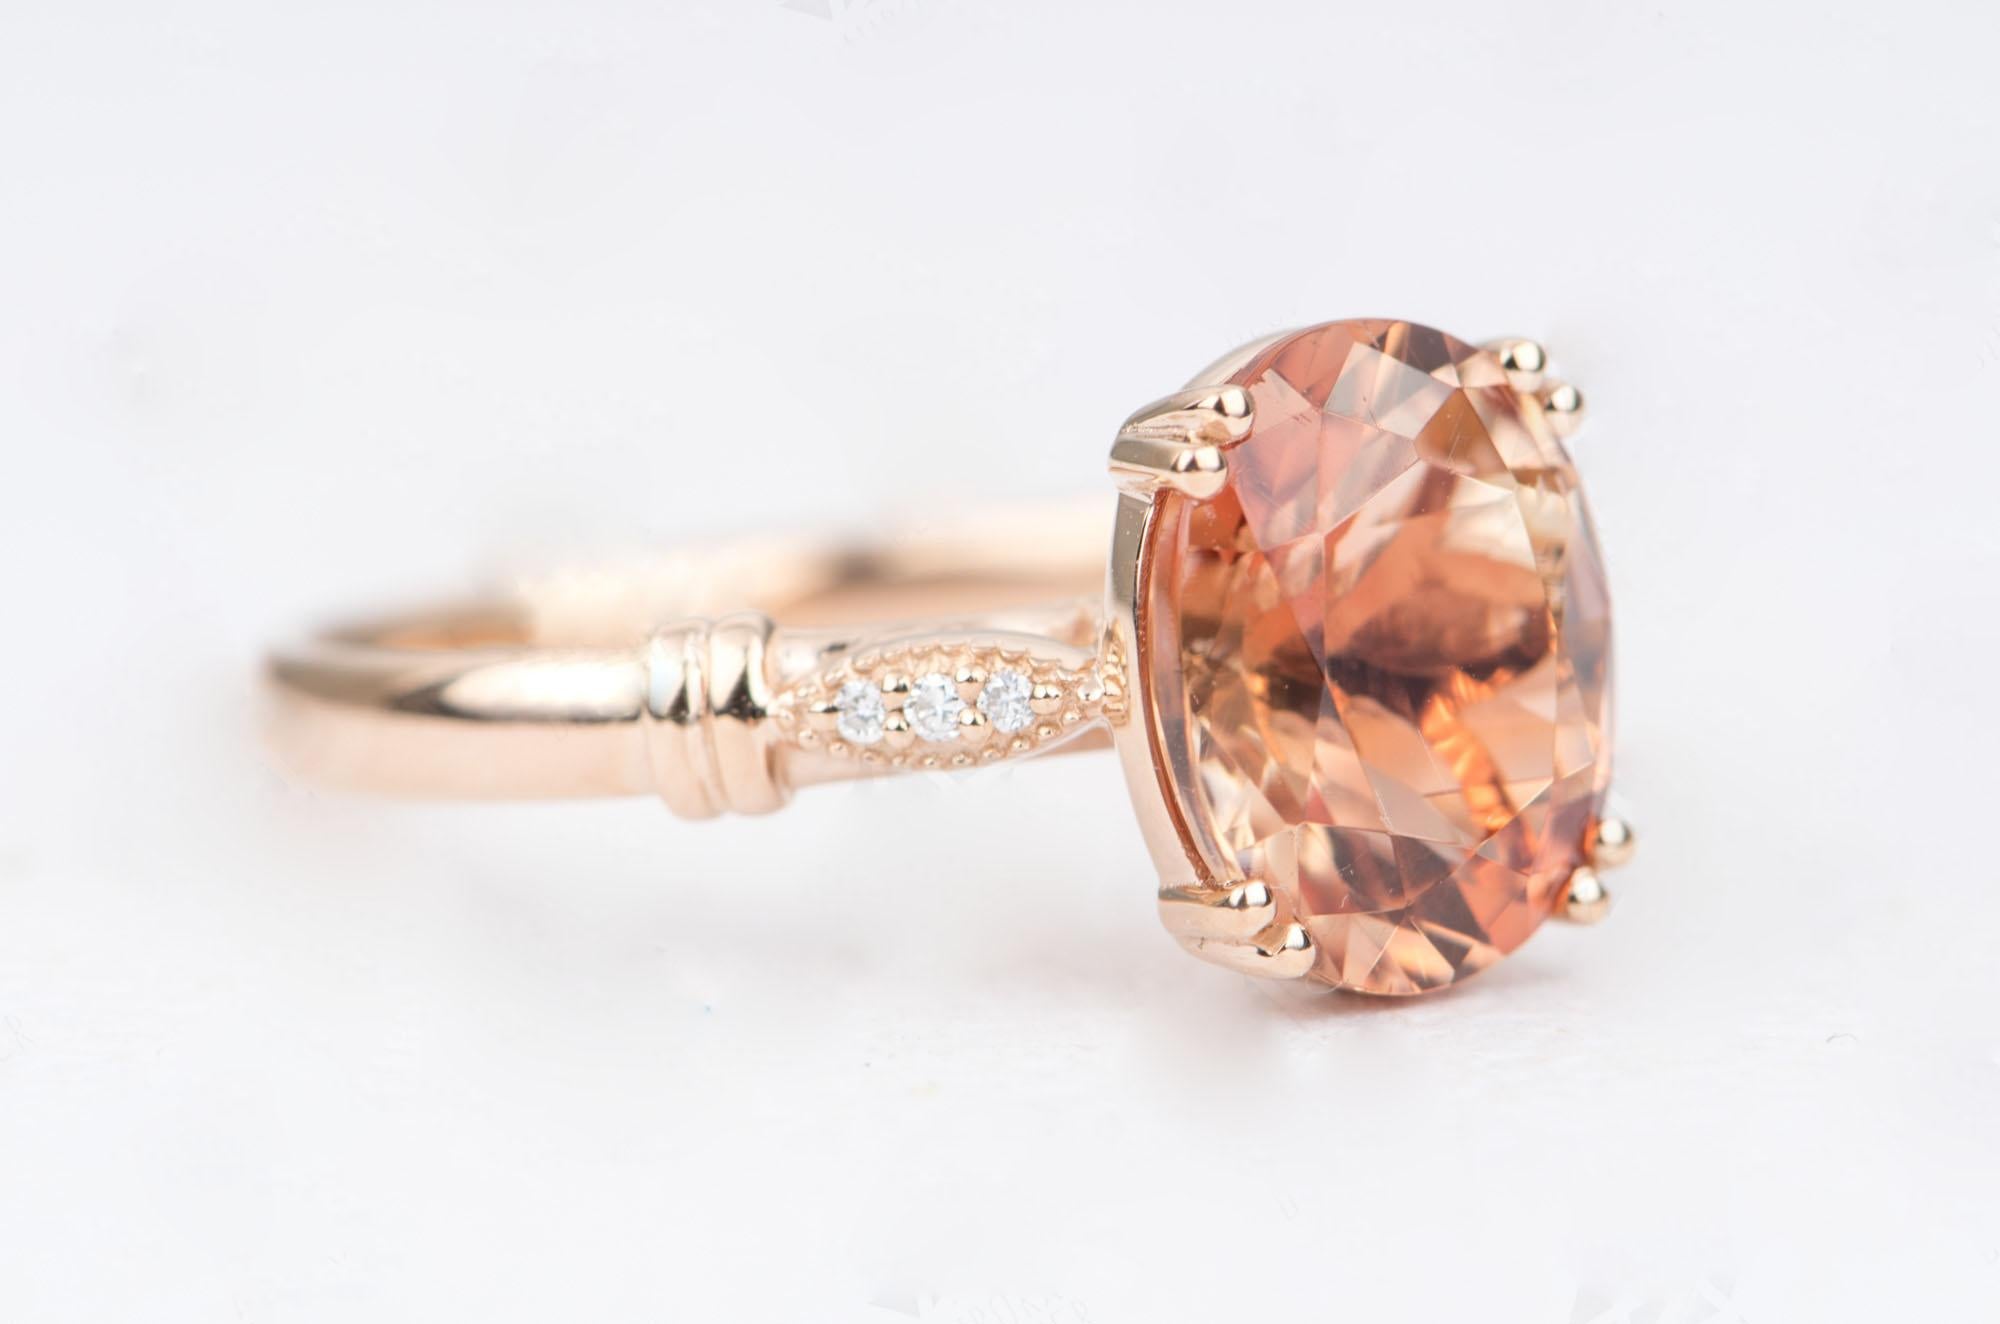 ♥  This is a beautiful vintage-inspired 14k rose gold ring featuring an Oregon sunstone in the center, flanked by a trio of white diamonds in a marquise setting on each side of the shank. 
 ♥  The sunstone center picks up a deep orange color with